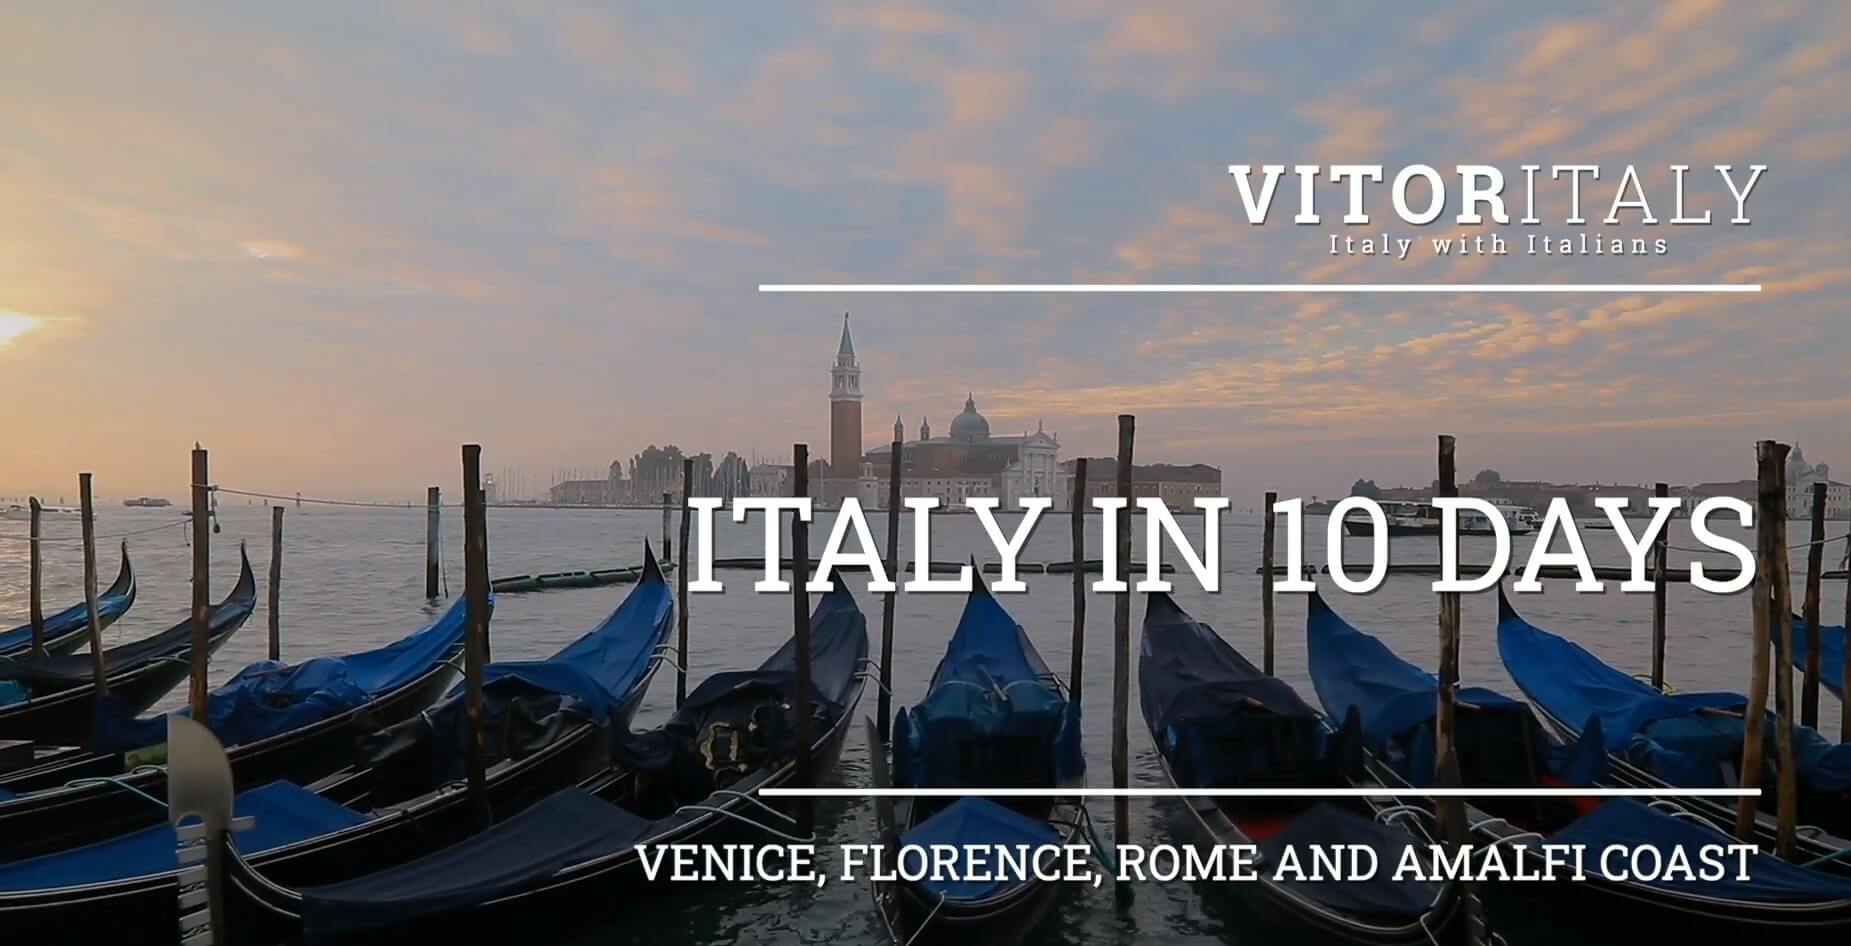 ITALY IN 10 DAYS PRIVATE LUXURY TOUR - Venice, Florence, Rome and Amalfi Coast